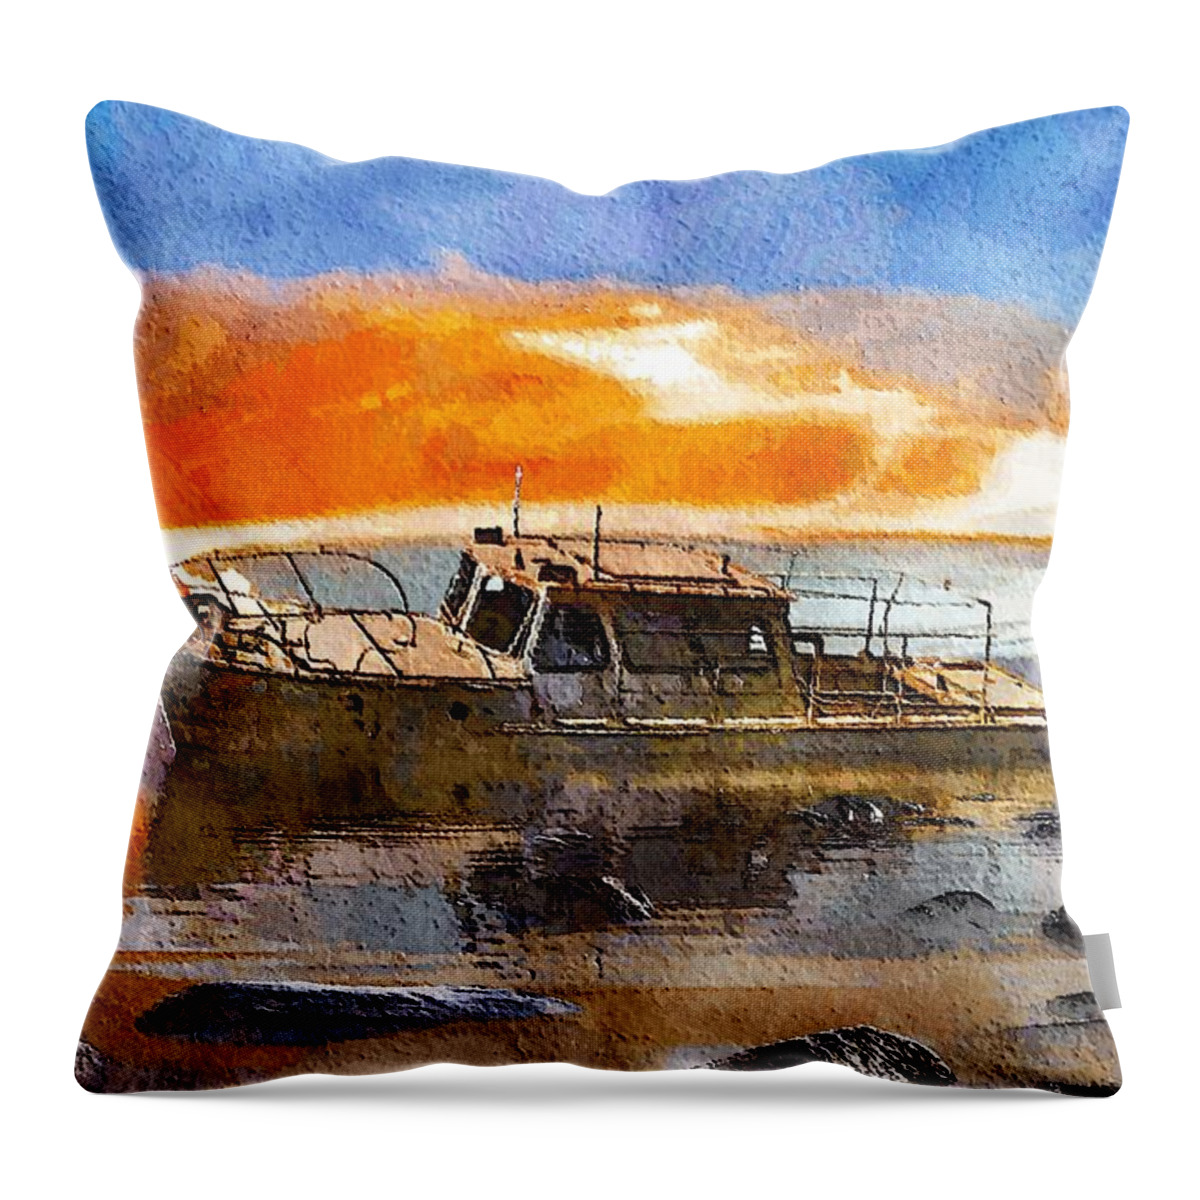 beached Wreck Throw Pillow featuring the painting Beached Wreck by Mark Taylor